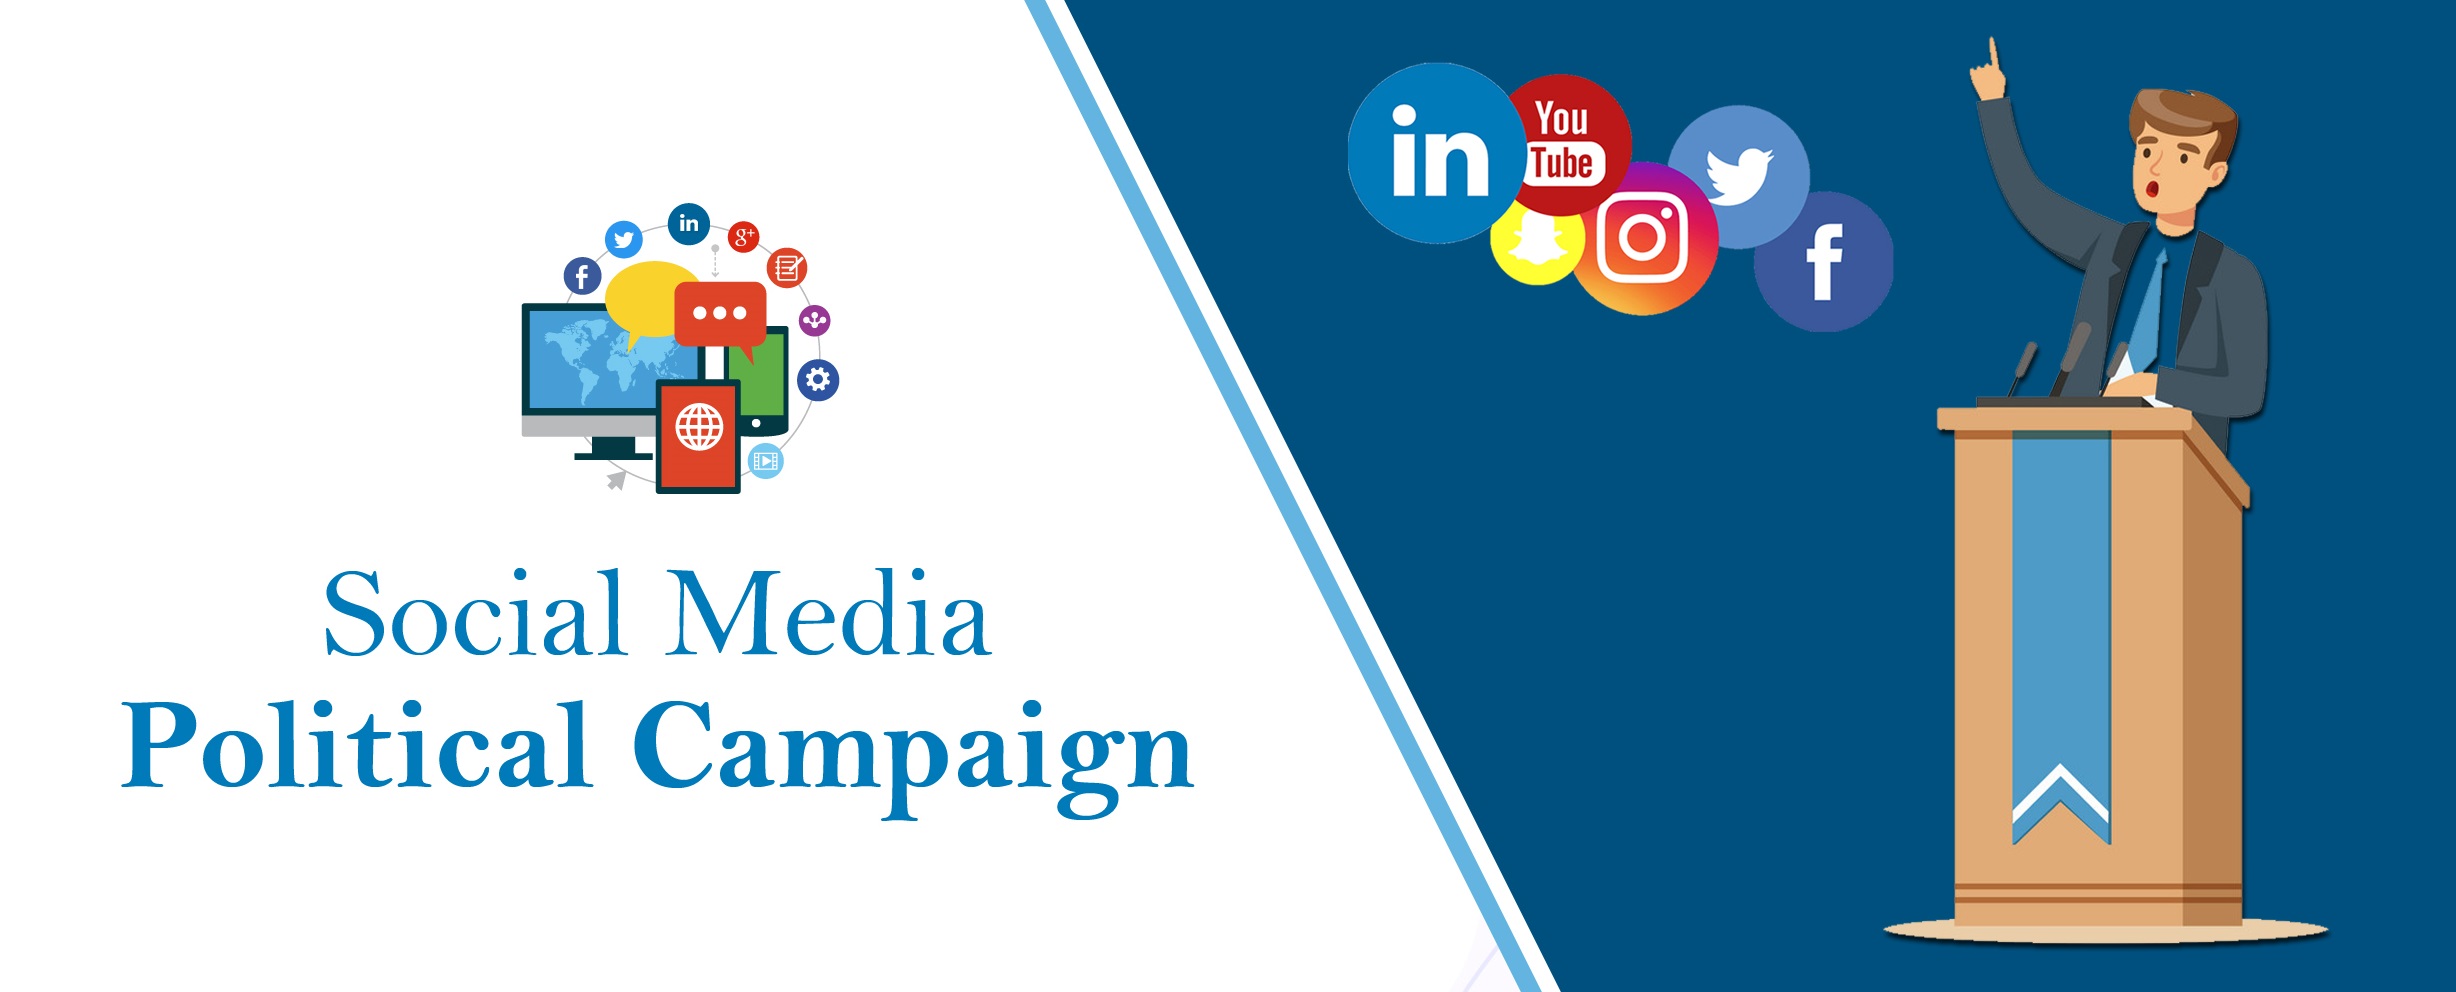 Digital marketing for election campaign